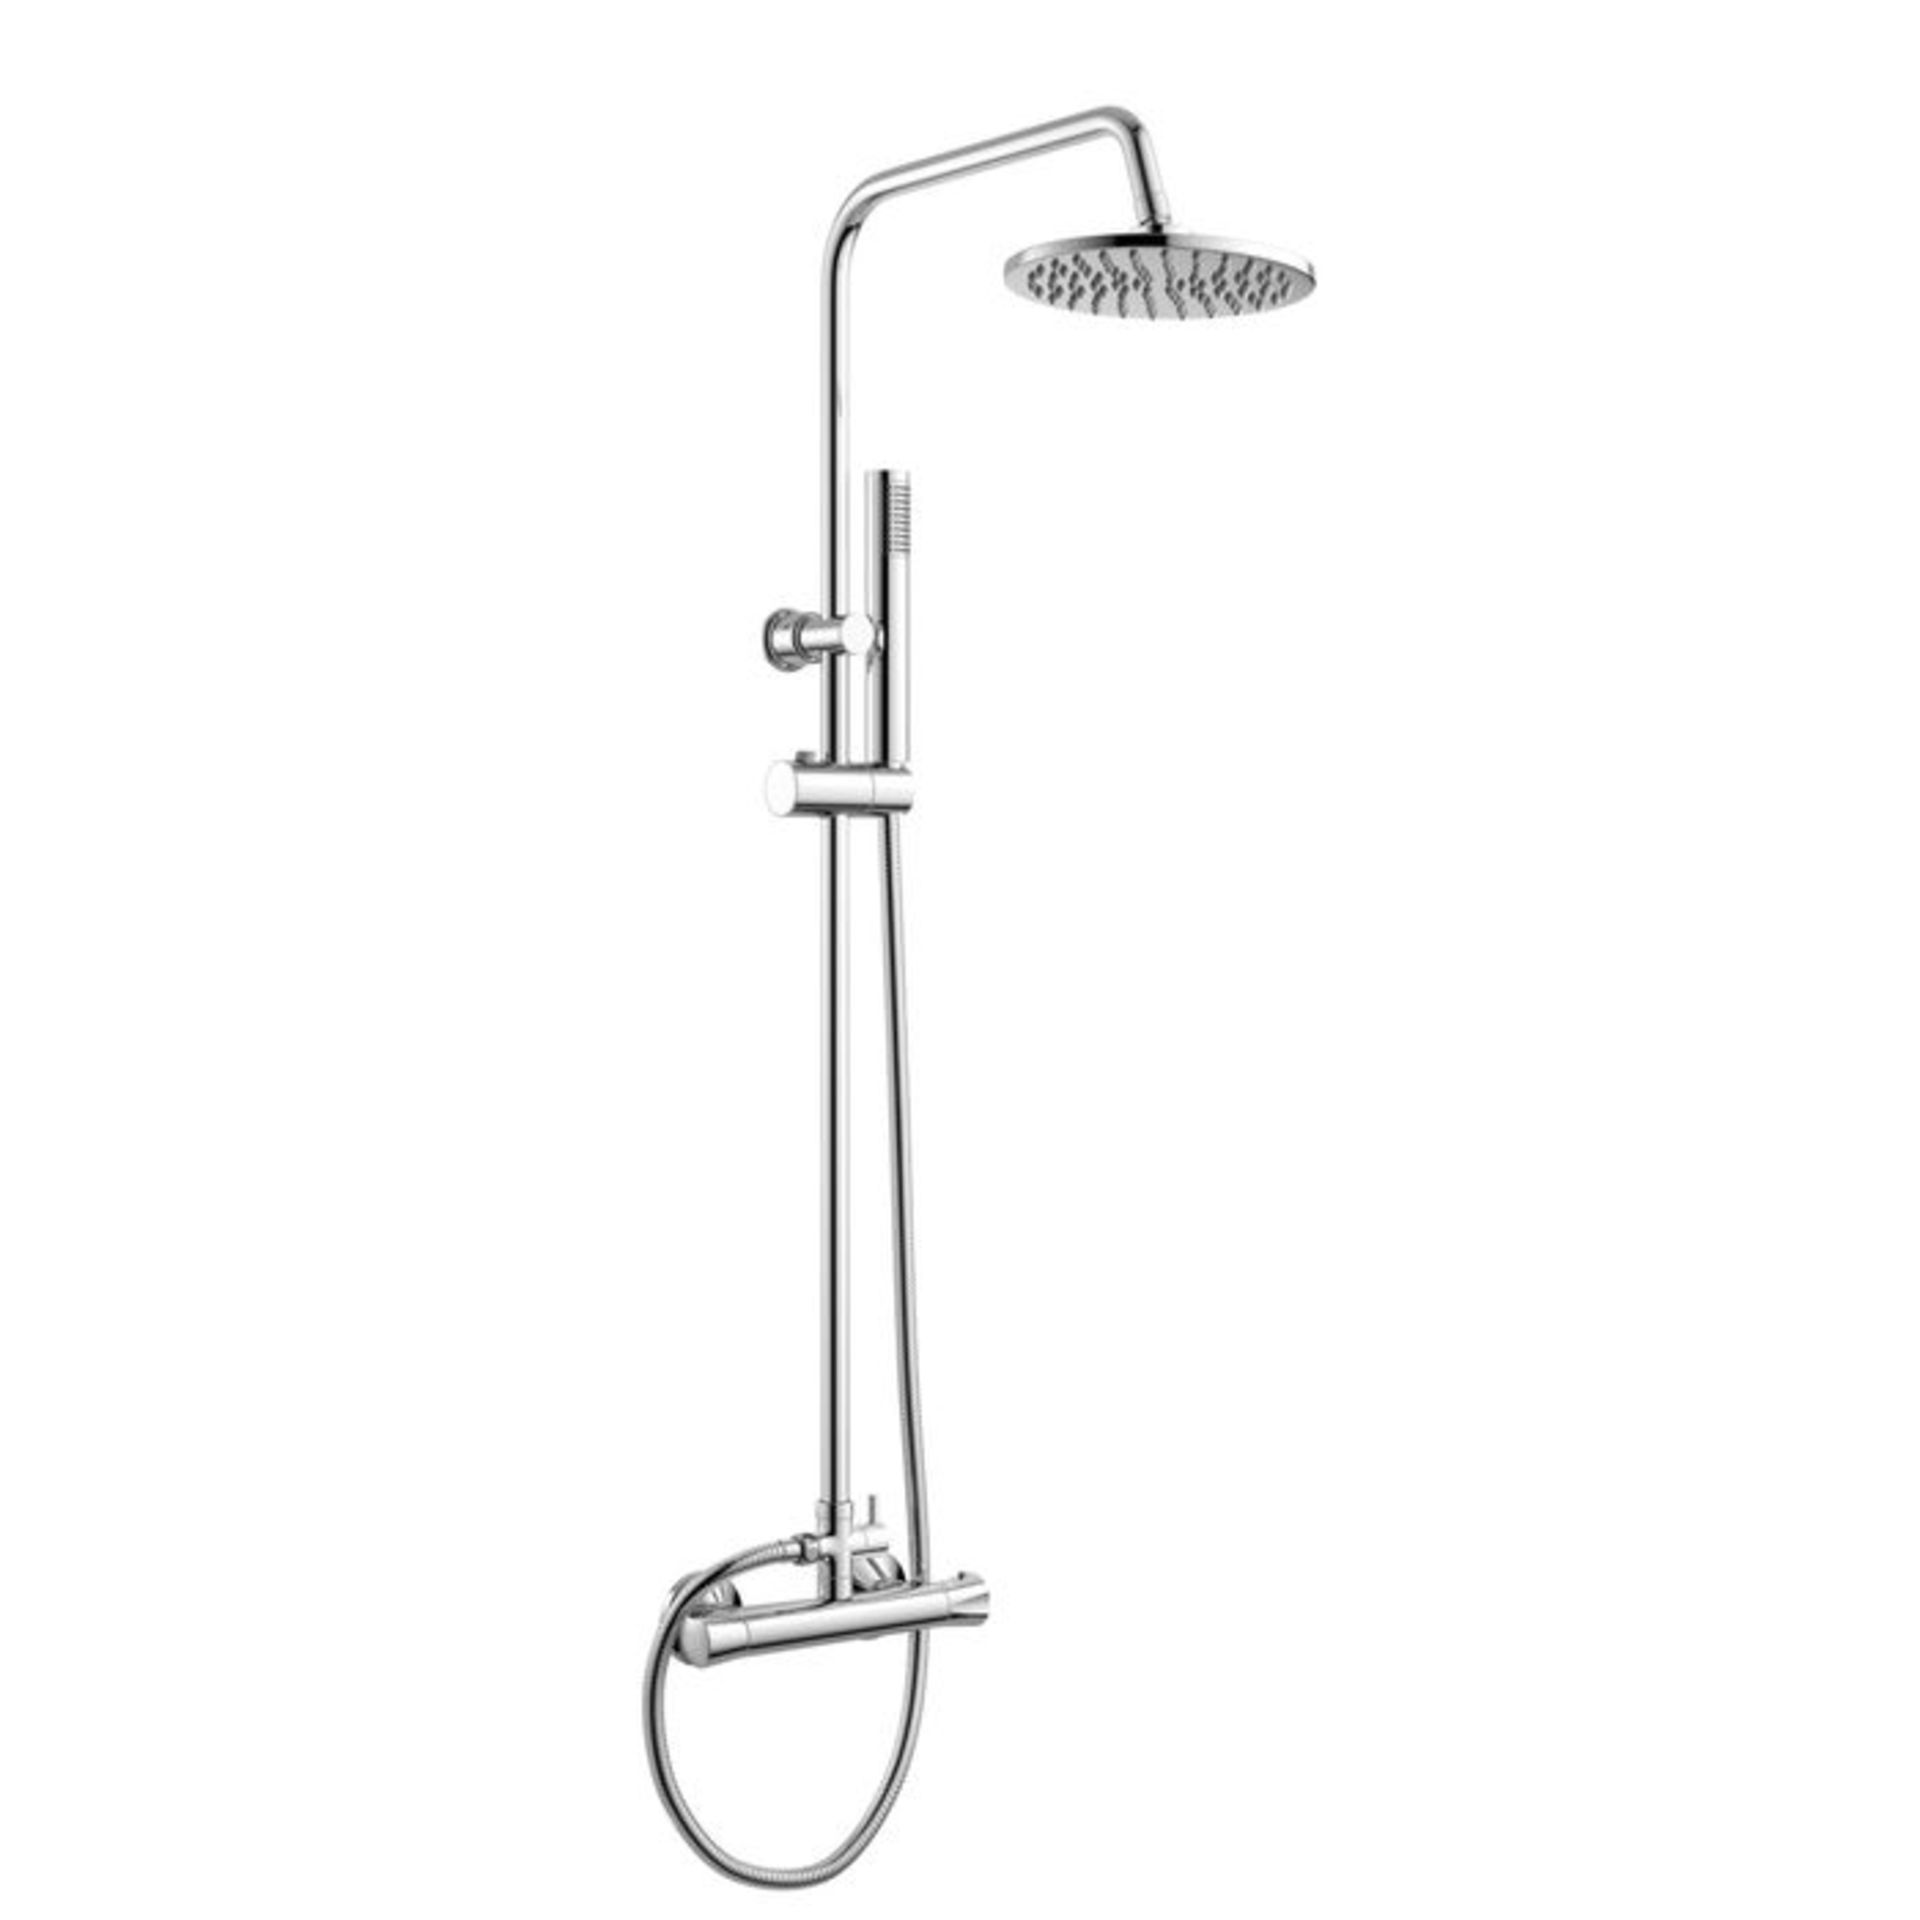 (KL180) Round Exposed Thermostatic Shower Kit & Head. Shower head features a tilt action for maximum